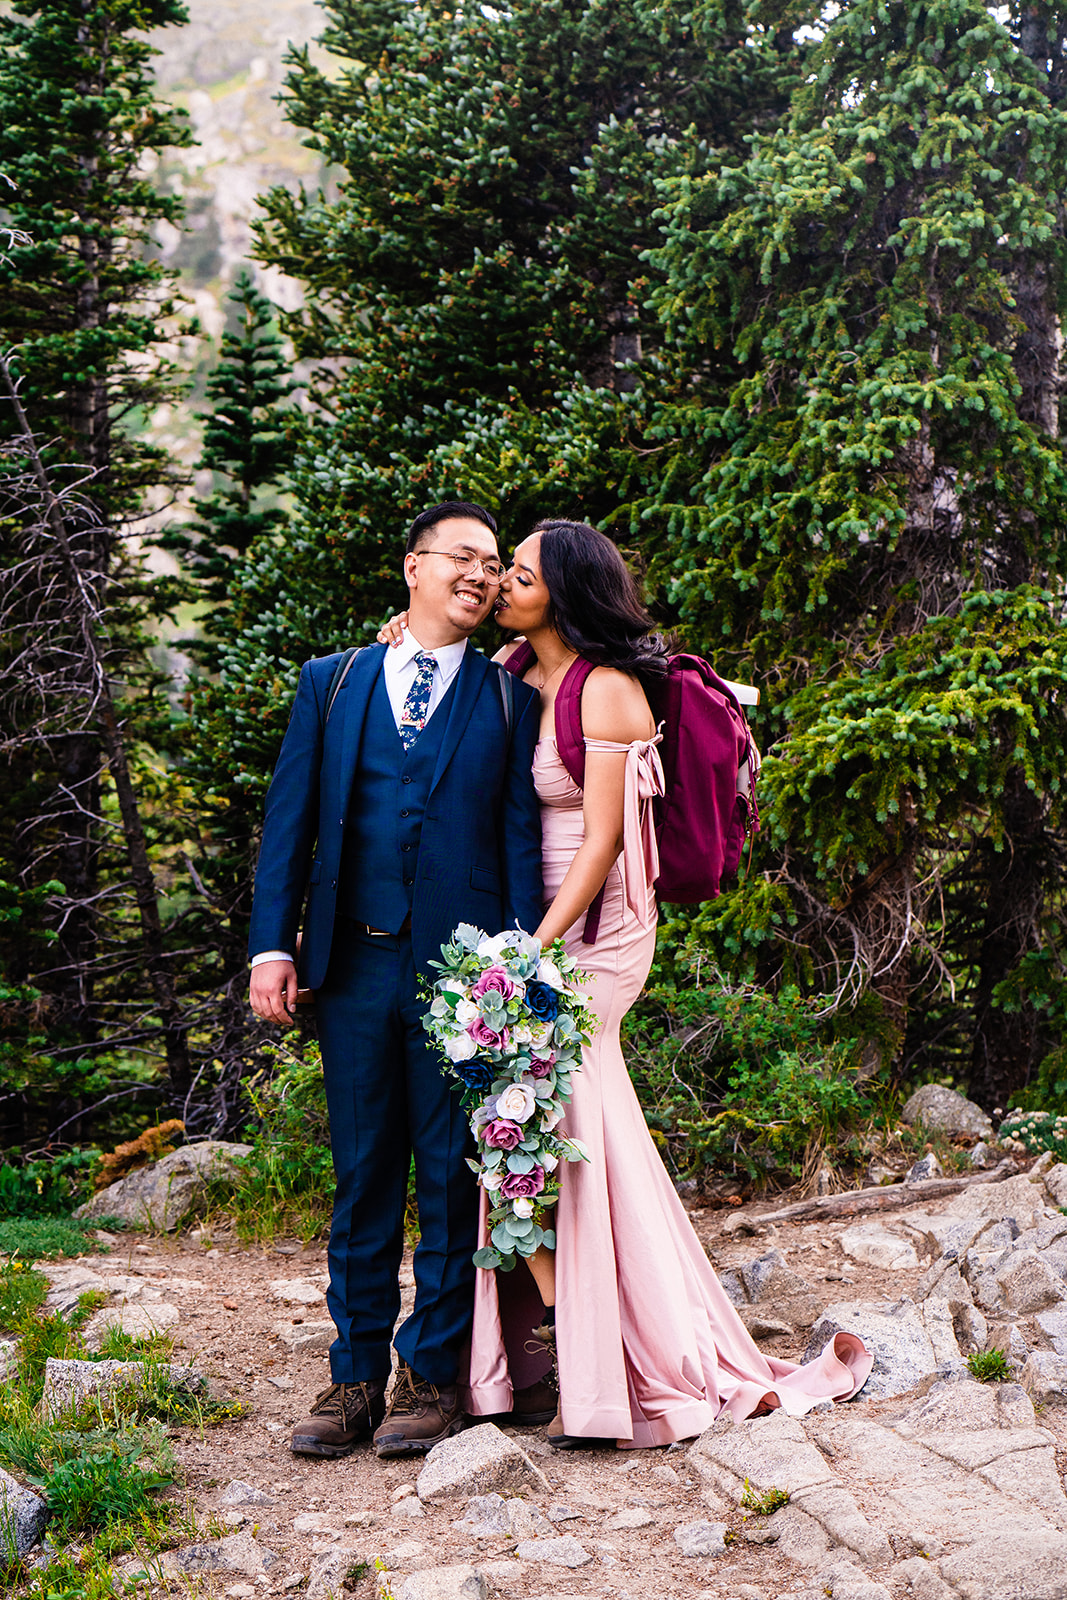 Beautiful bride and groom during their outdoor boulder elopement day